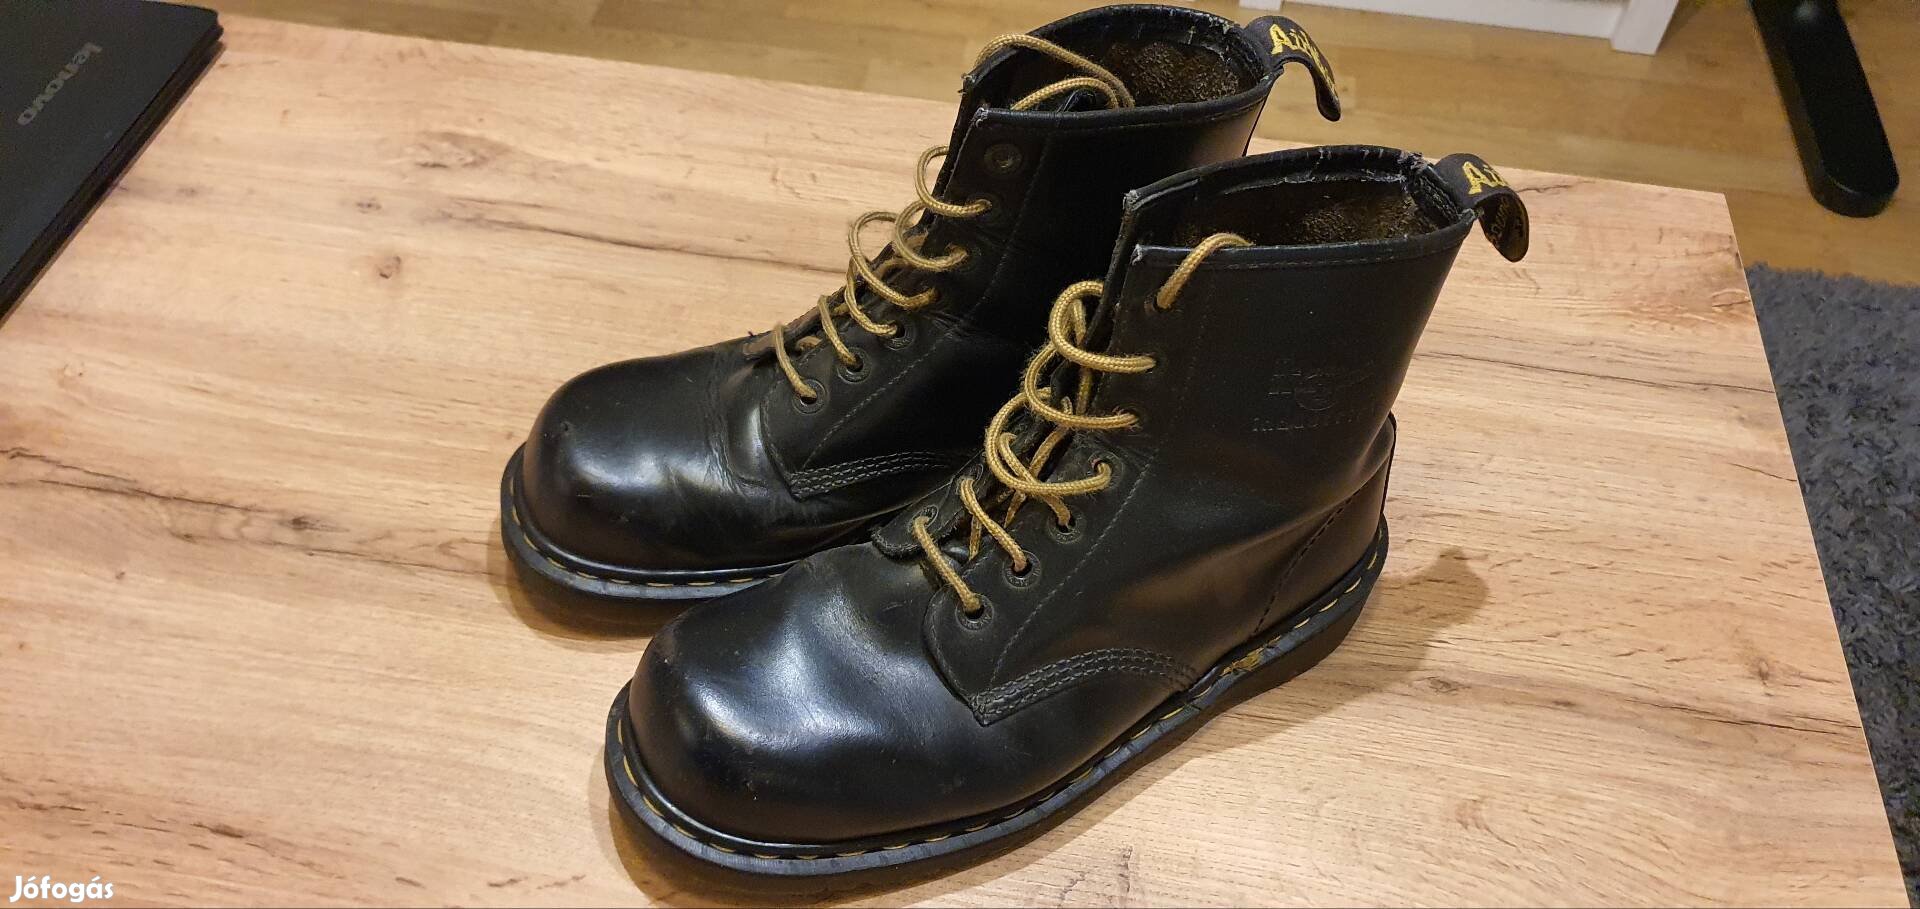 Dr. Martens Industrial - Made In England 43-44